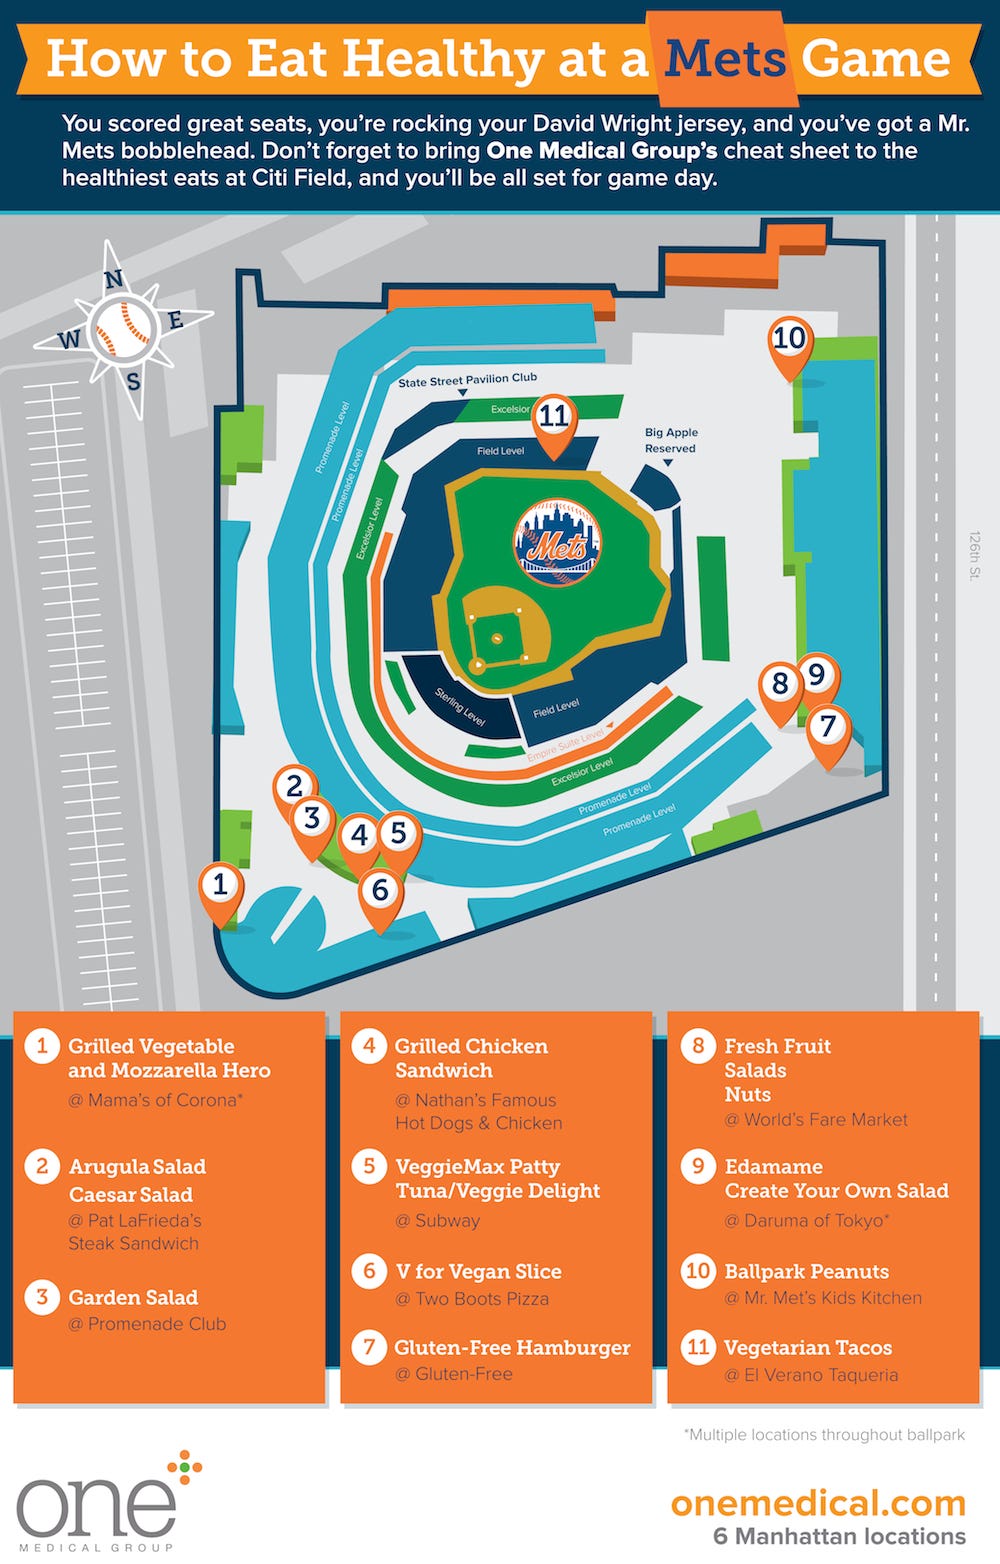 How to eat healthy at Citi Field by Mets Cetera